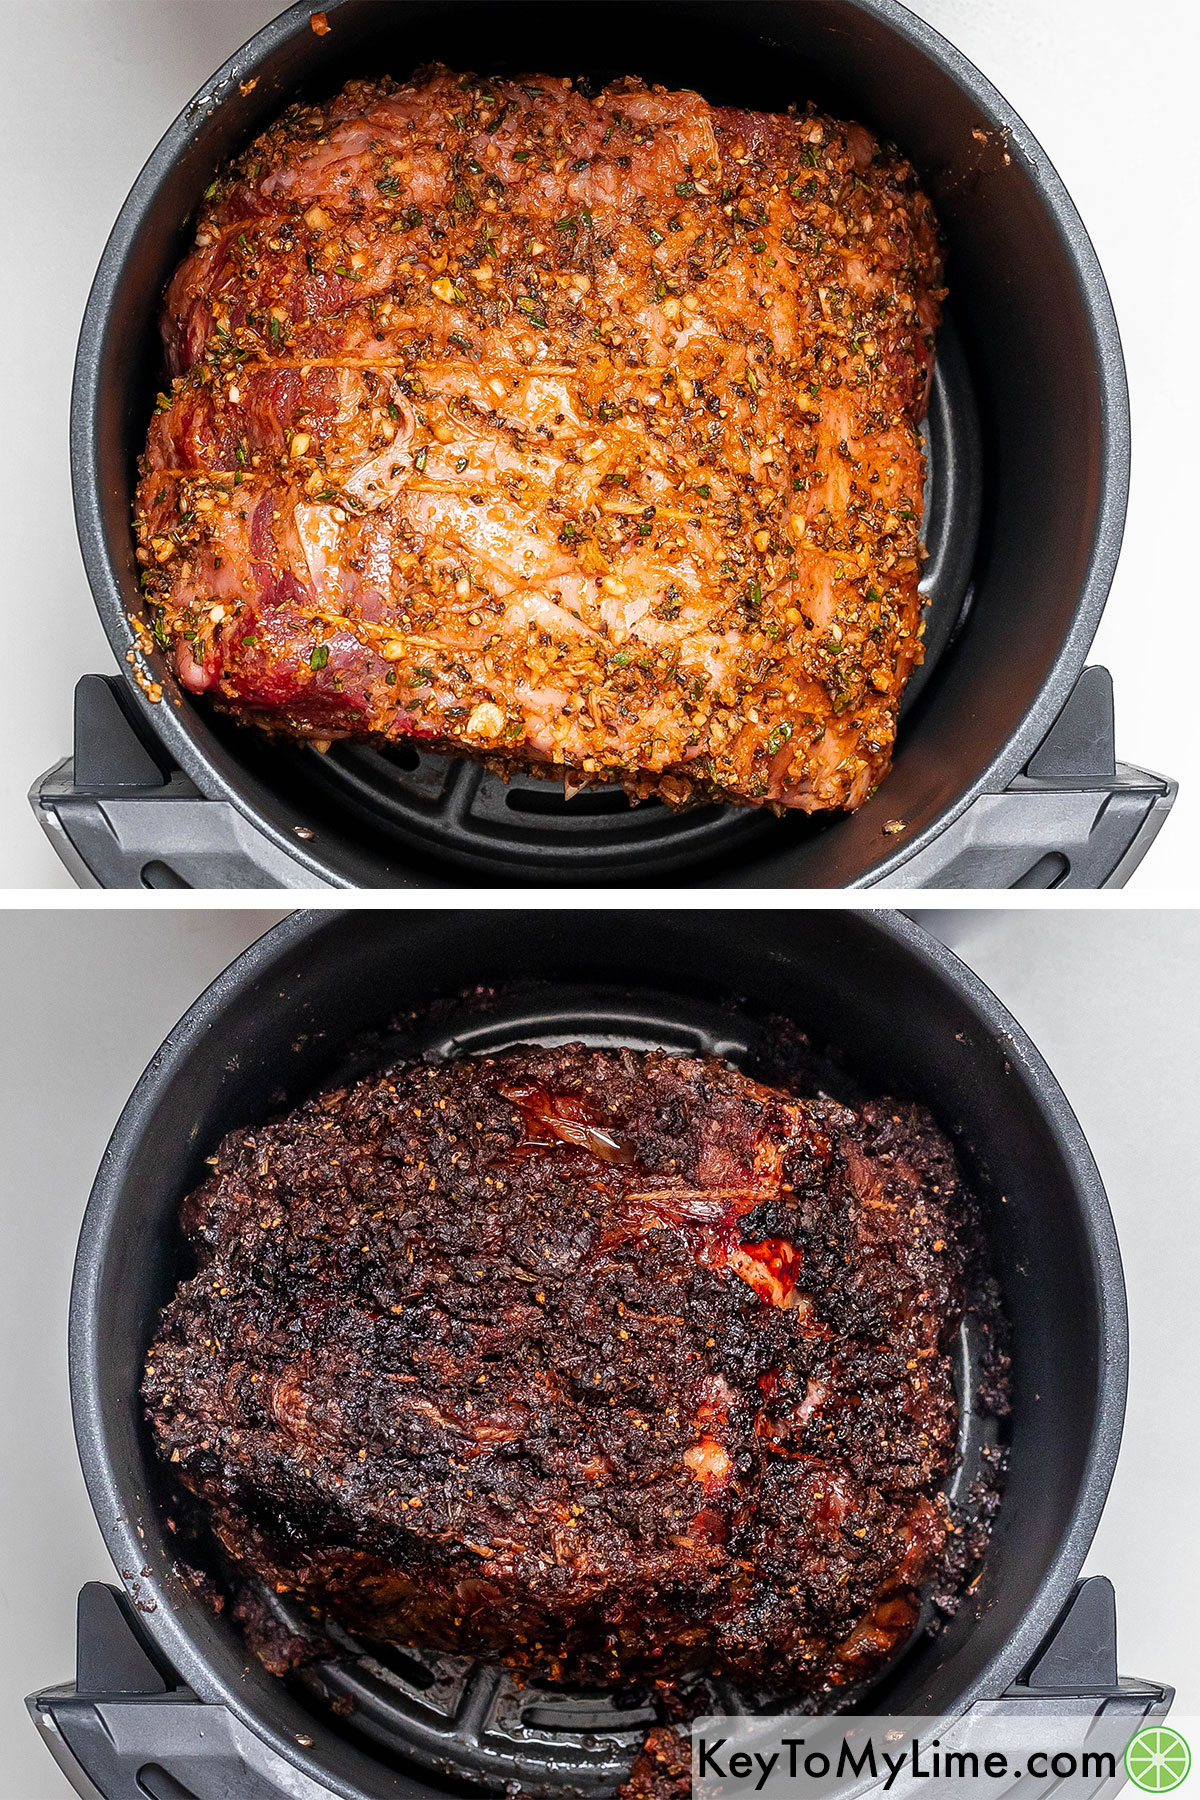 Adding the seasoned roast to a preheat air fryer basket then cooking until reaching a internal temperature of 125F.